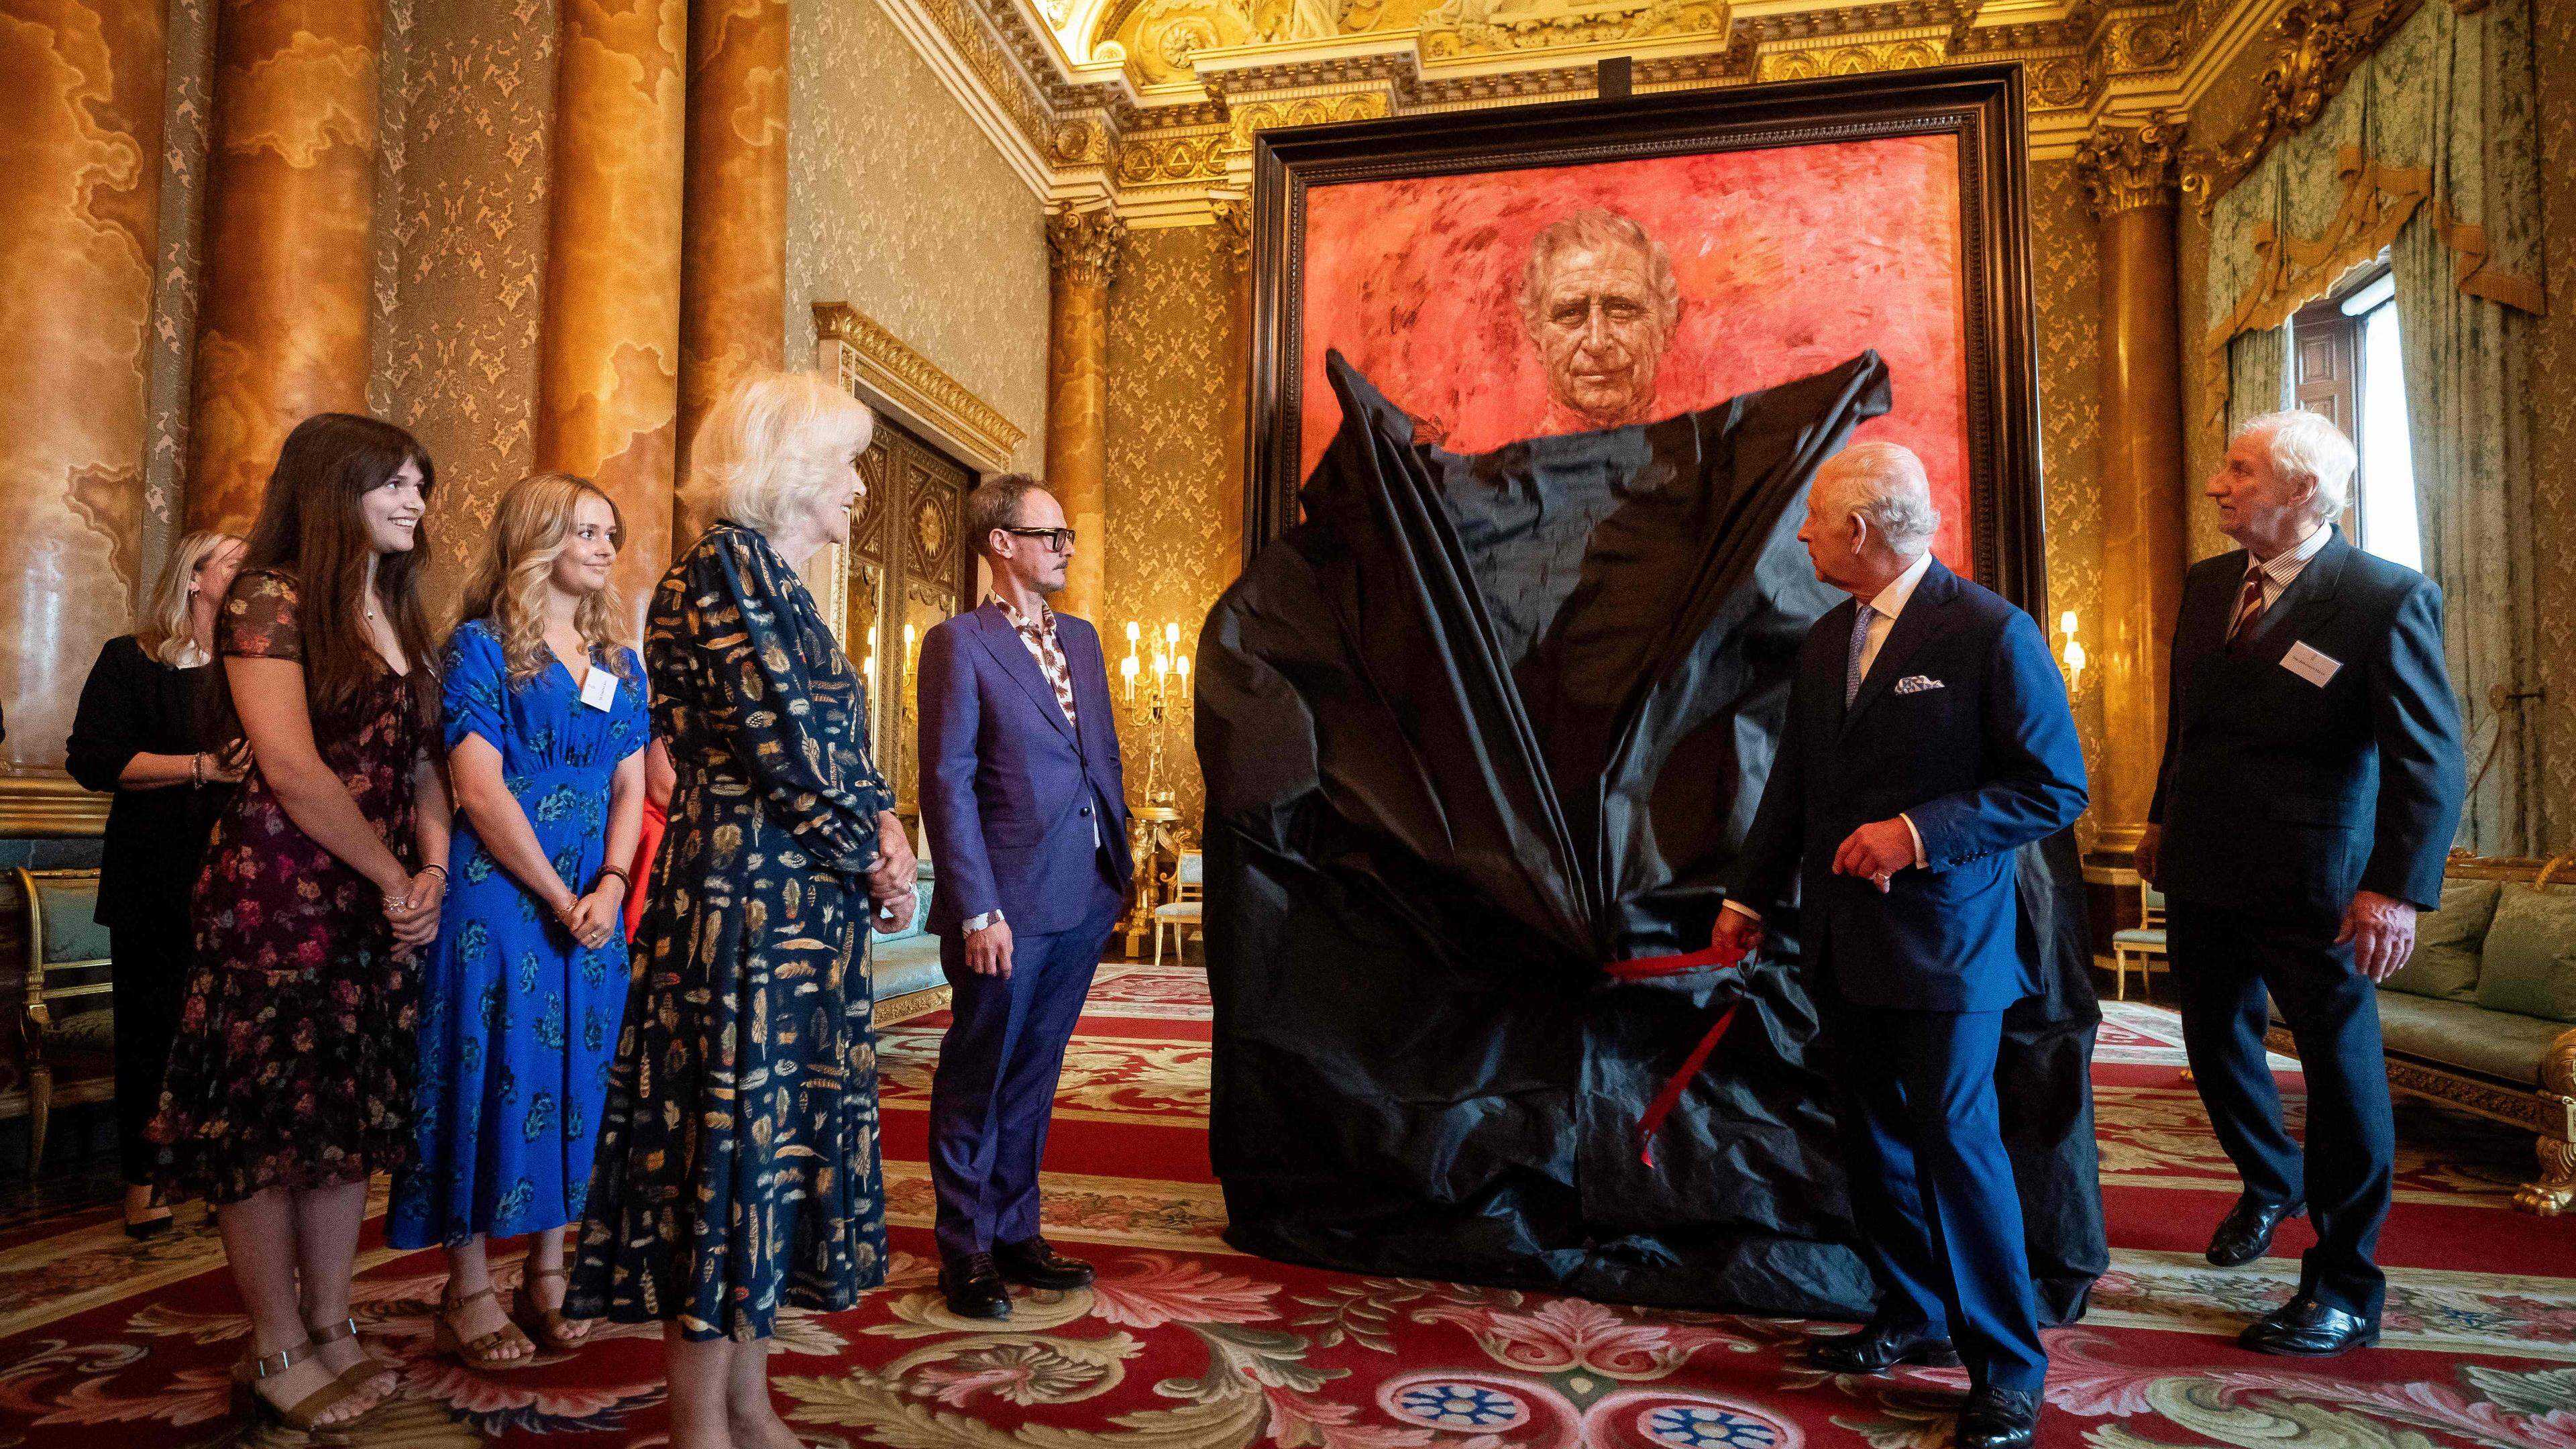 Britain's Queen Camilla (4L) watches as Britain's King Charles III (2R) unveils an official portrait of himself, by artist artist Jonathan Yeo (5L), depicting the King wearing the uniform of the Welsh Guards, of which he was made Regimental Colonel in 1975, in the Blue Drawing Room at Buckingham Palace in London on May 14, 2024. The official portrait was commissioned in 2020 to celebrate the then Prince of Wales's 50 years as a member of The Drapers' Company in 2022. Artist Jonathan Yeo had four sittings with the King Charles III, beginning when he was Prince of Wales in June 2021 at Highgrove, and later at Clarence House. The last sitting took place in November 2023 at Clarence House. Yeo also worked from drawings and photography he took, allowing him to work on the portrait in his London studio between sittings. The canvas size - approximately 8.5 by 6.5 feet when framed - was carefully considered to fit within the architecture of Drapers' Hall and the context of the paintings it will eventually hang alongside. (Photo by Aaron Chown / POOL / AFP) / RESTRICTED TO EDITORIAL USE - MANDATORY MENTION OF THE ARTIST UPON PUBLICATION - TO ILLUSTRATE THE EVENT AS SPECIFIED IN THE CAPTION